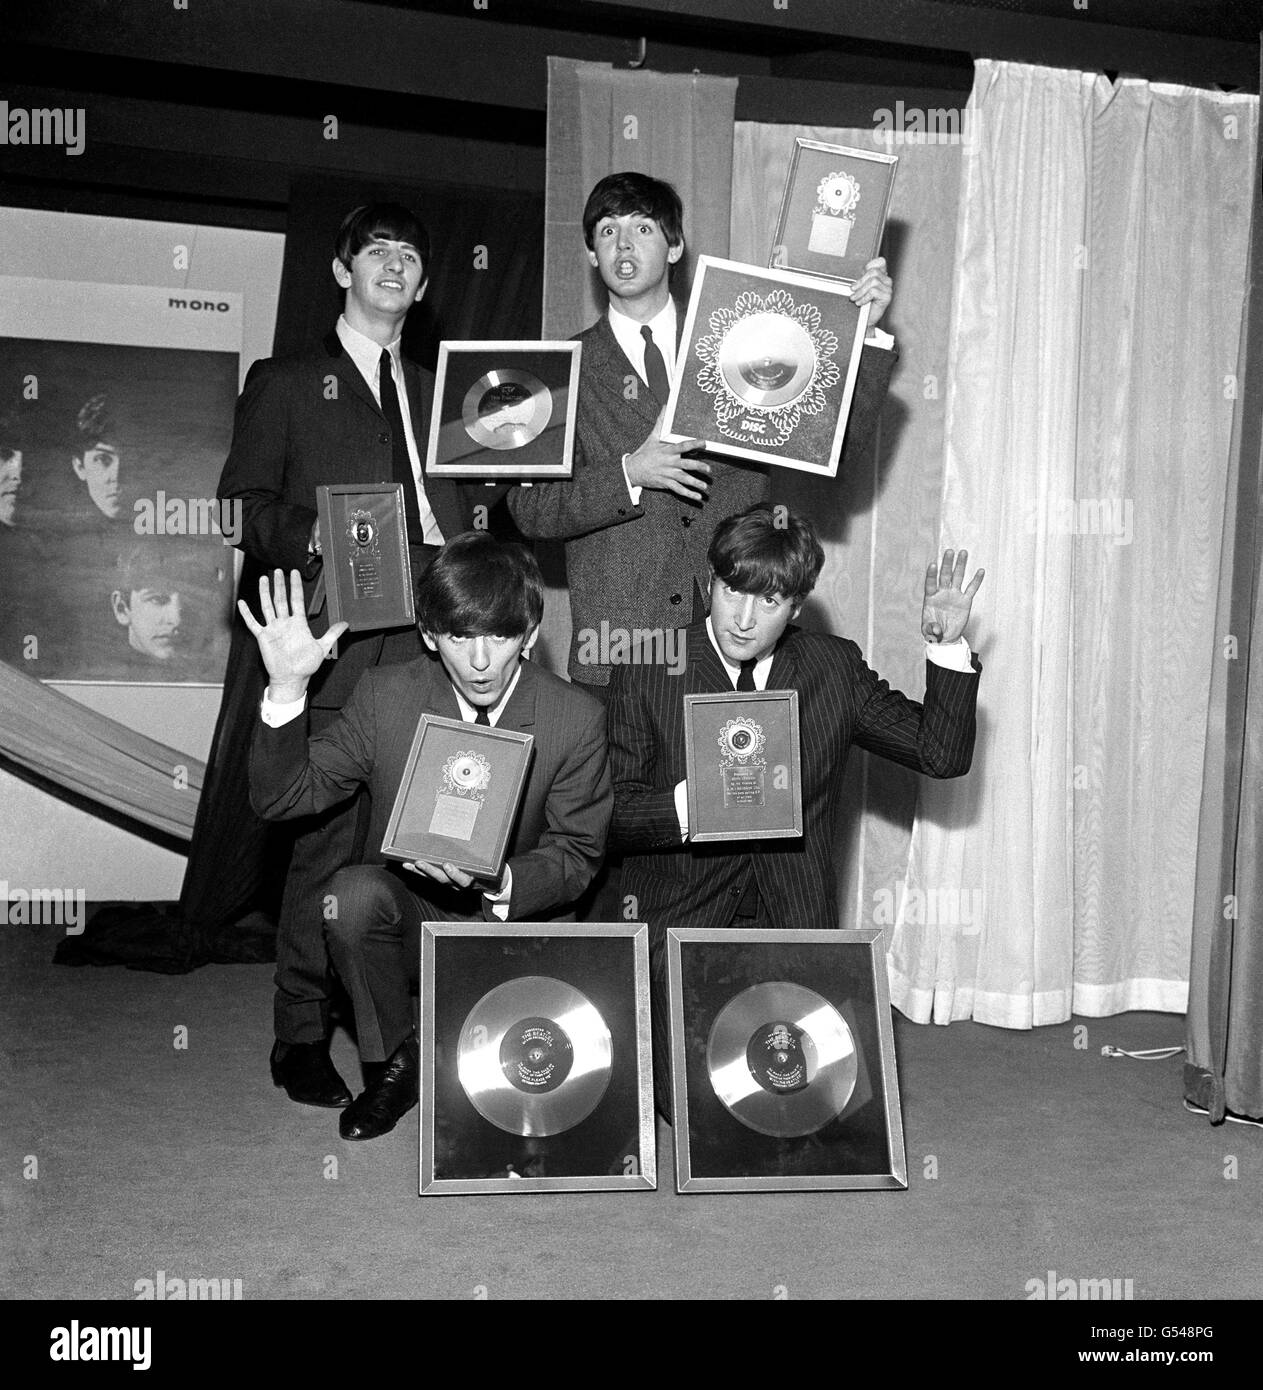 The Beatles, pictured at EMI House Manchester Square, London, with a hoard of silver discs. They were presented with two silver LPs to mark the quarter-million plus sales of their first LP 'Please Please Me' and their new one 'With the Beatles' as well as for their 'Twist & Shout' EP and 'She Loves You'. Left to right: Ringo Starr, George Harrison, Paul McCartney and John Lennon. Stock Photo